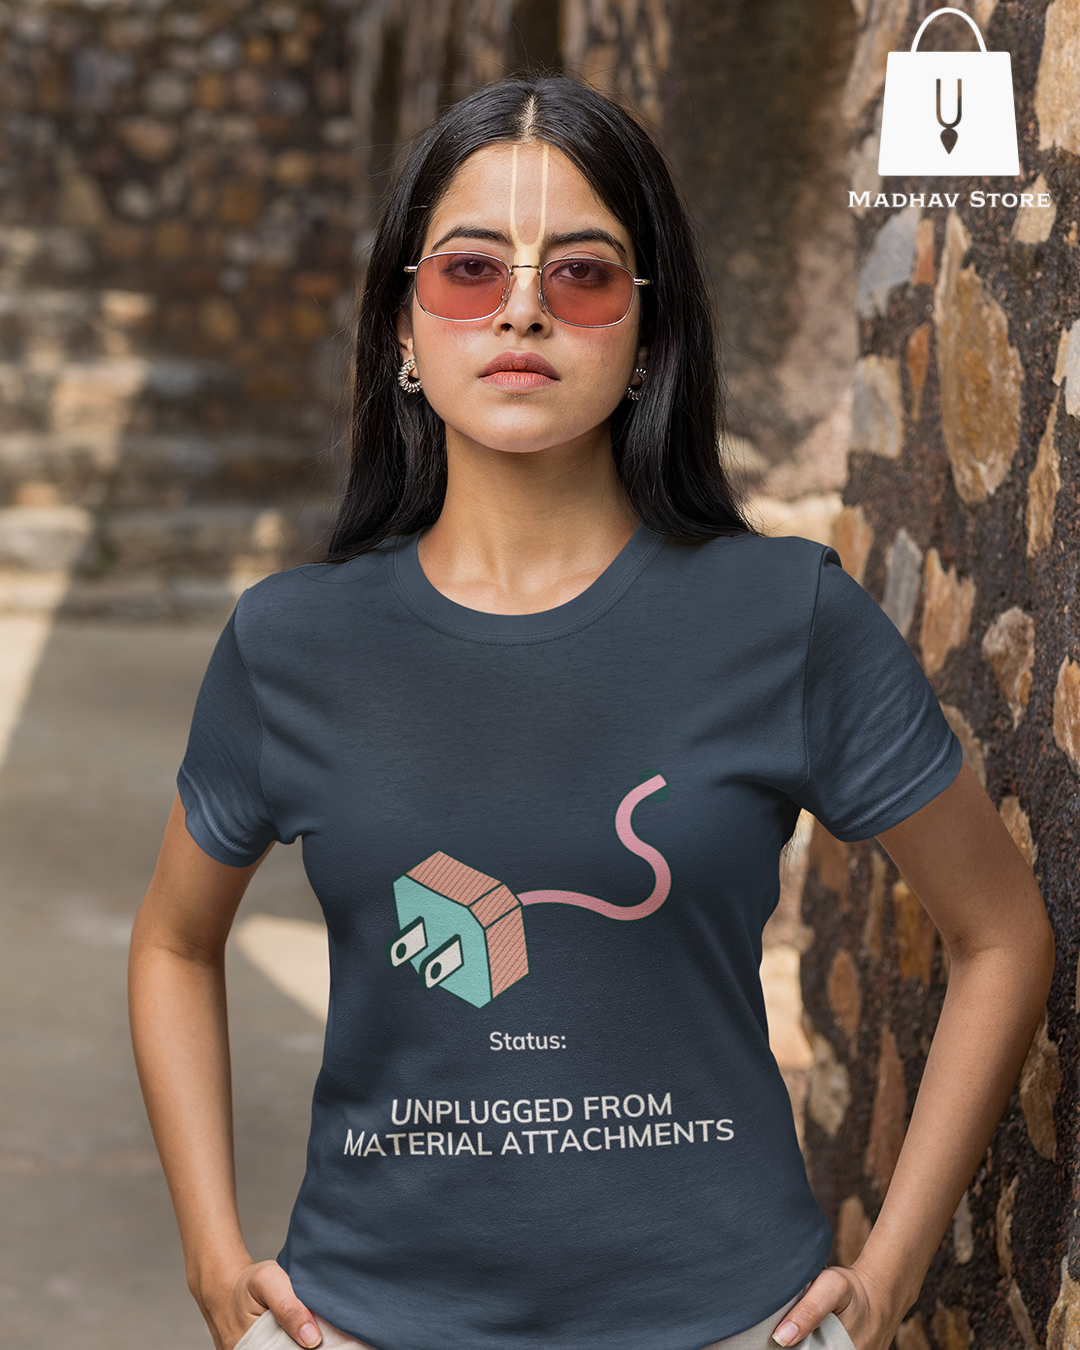 Unplugged from material attachments Tshirt for Women